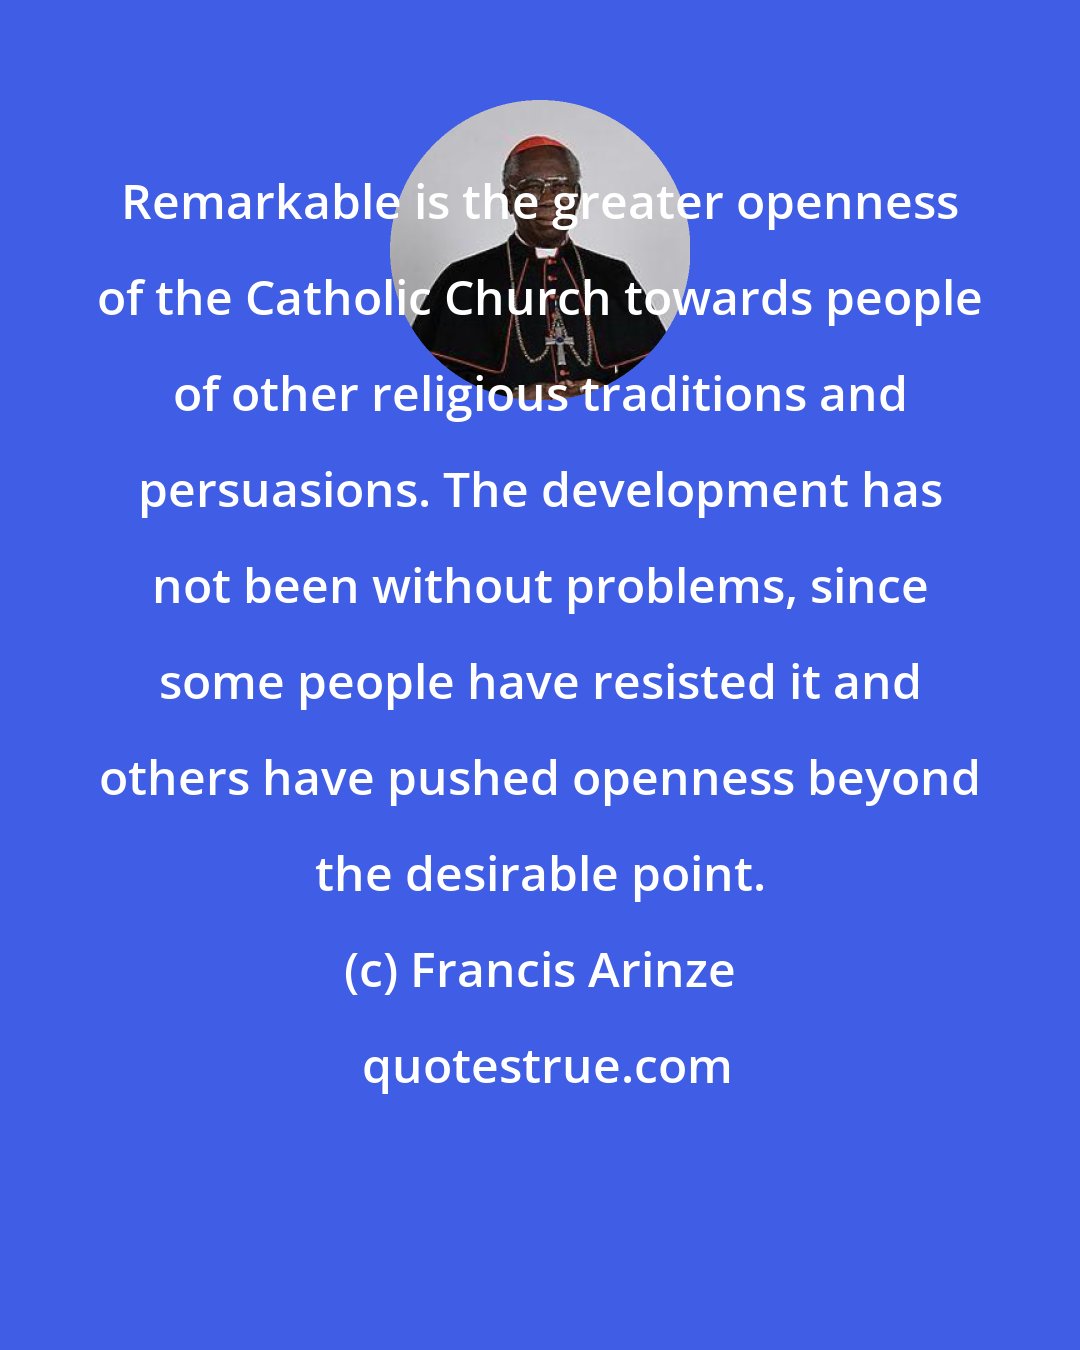 Francis Arinze: Remarkable is the greater openness of the Catholic Church towards people of other religious traditions and persuasions. The development has not been without problems, since some people have resisted it and others have pushed openness beyond the desirable point.